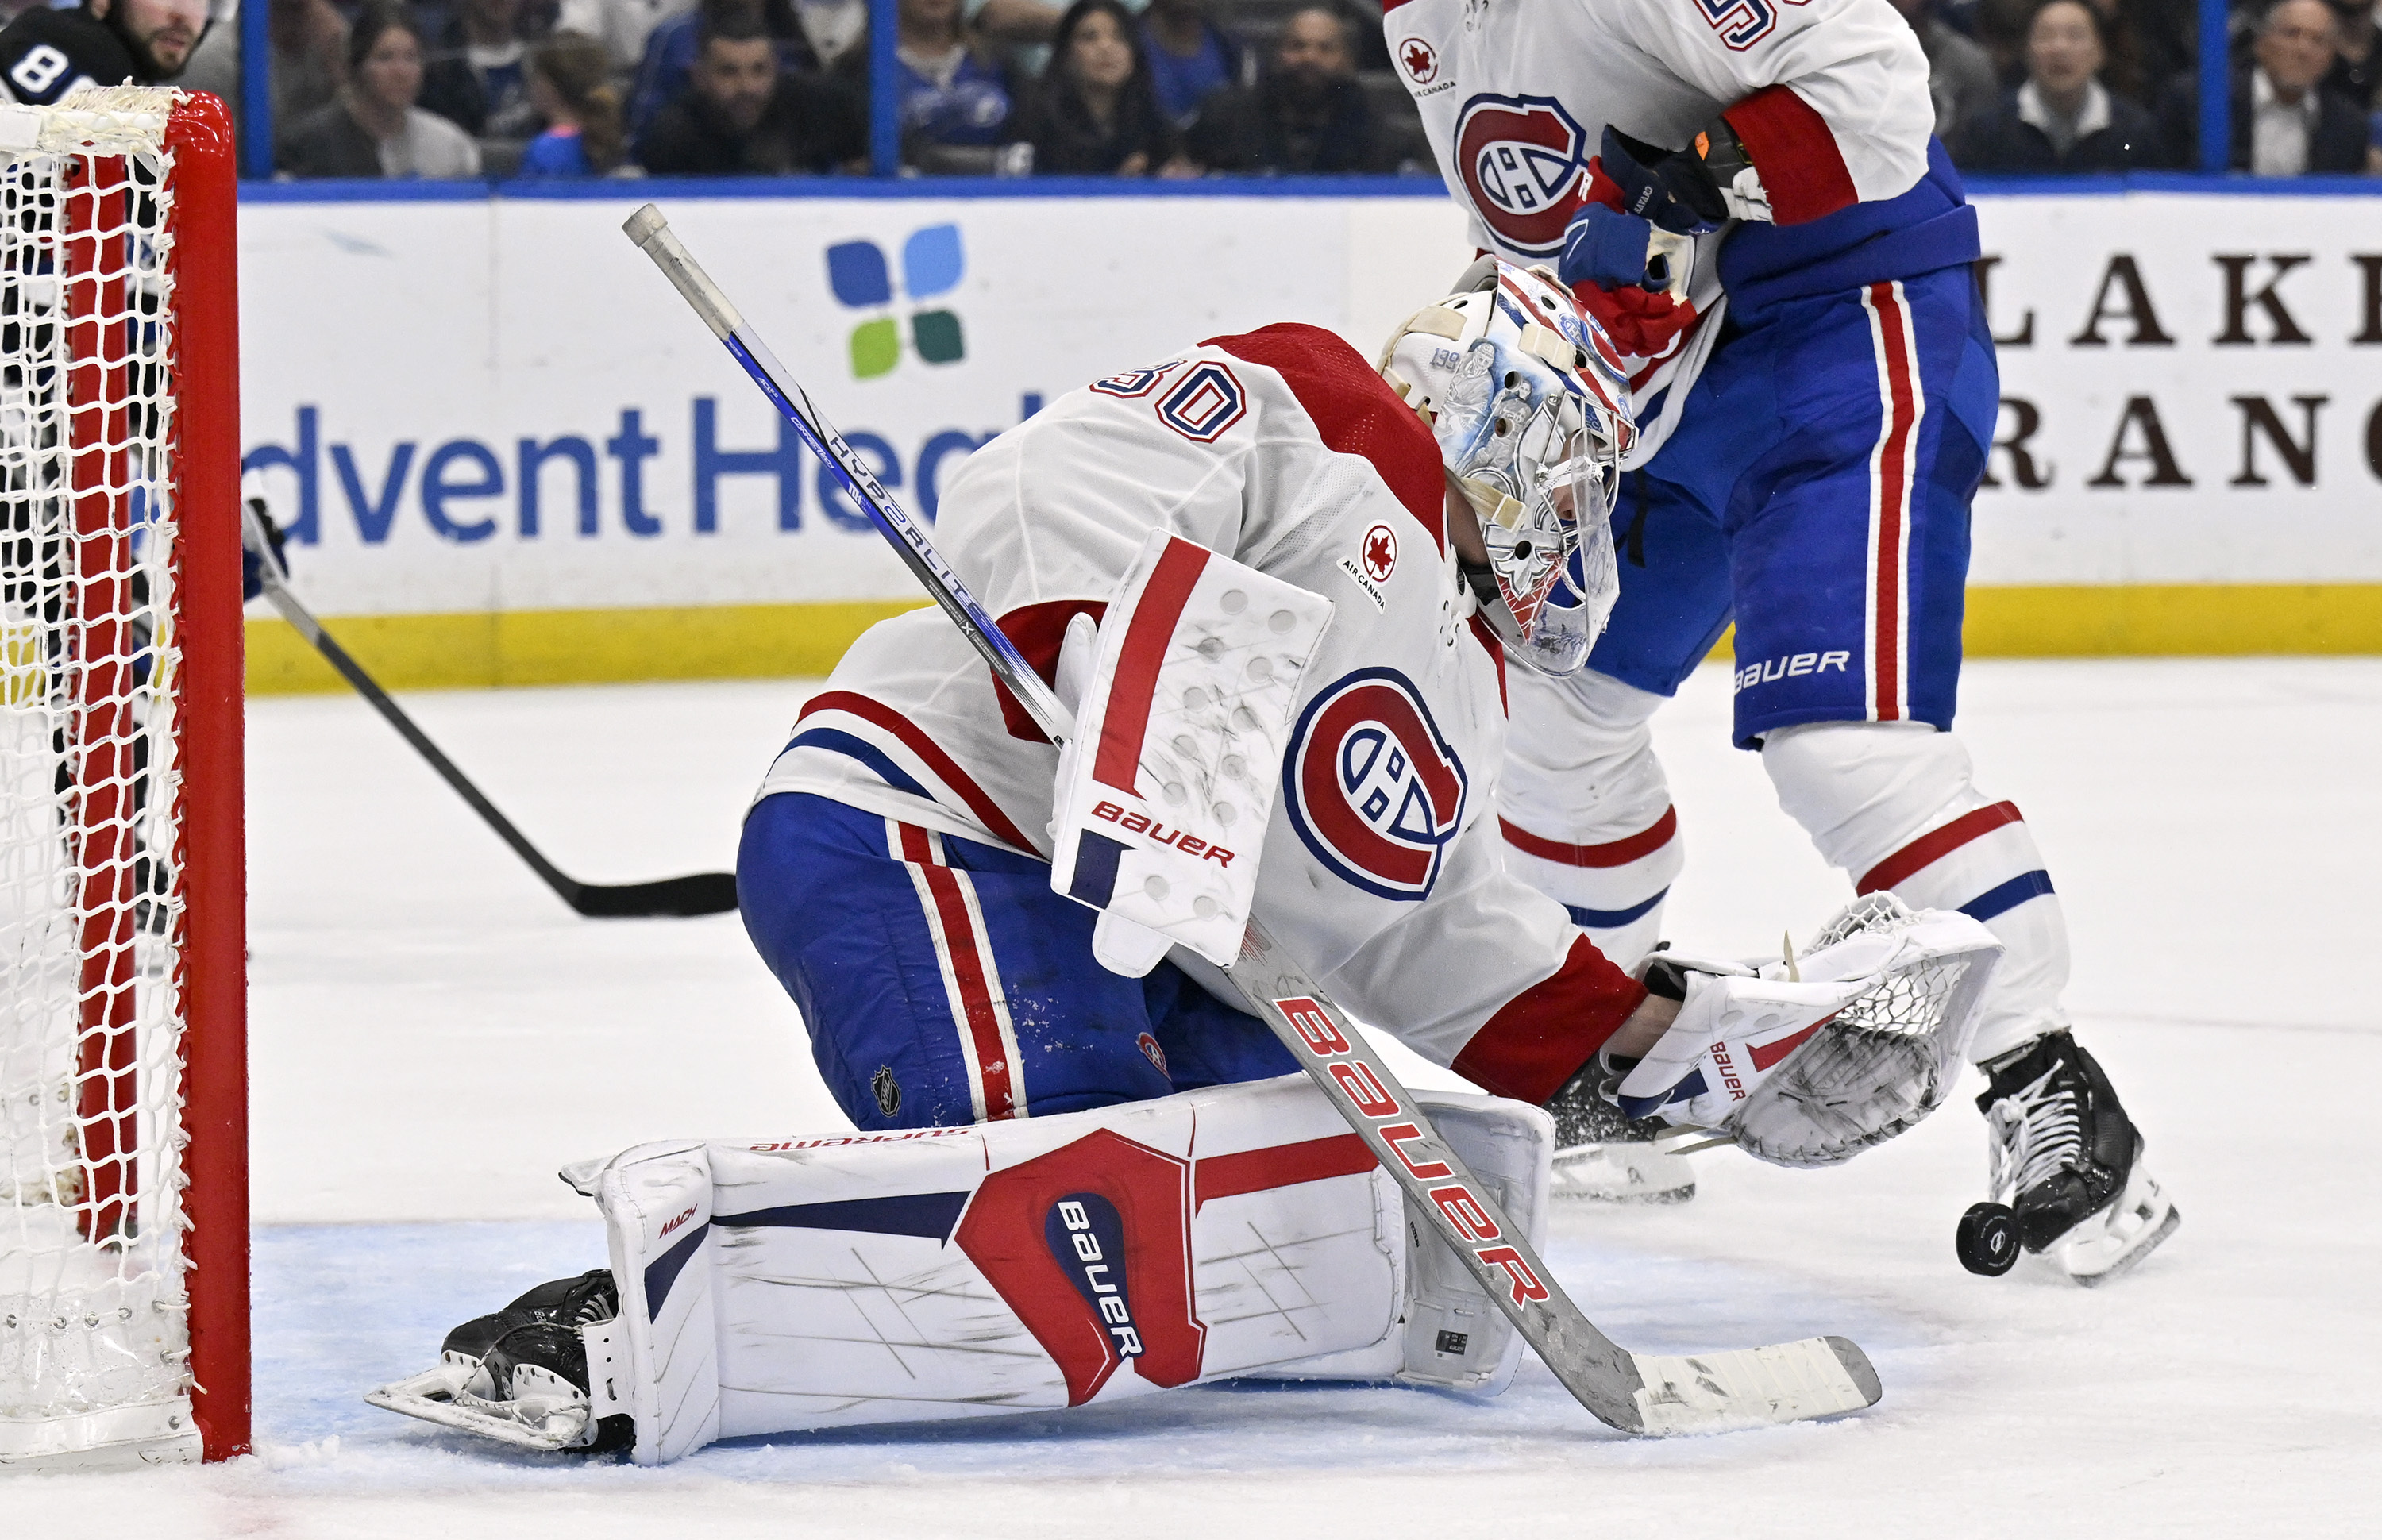 Call of the Wilde: Montreal Canadiens lose in shootout to Tampa Bay Lightning